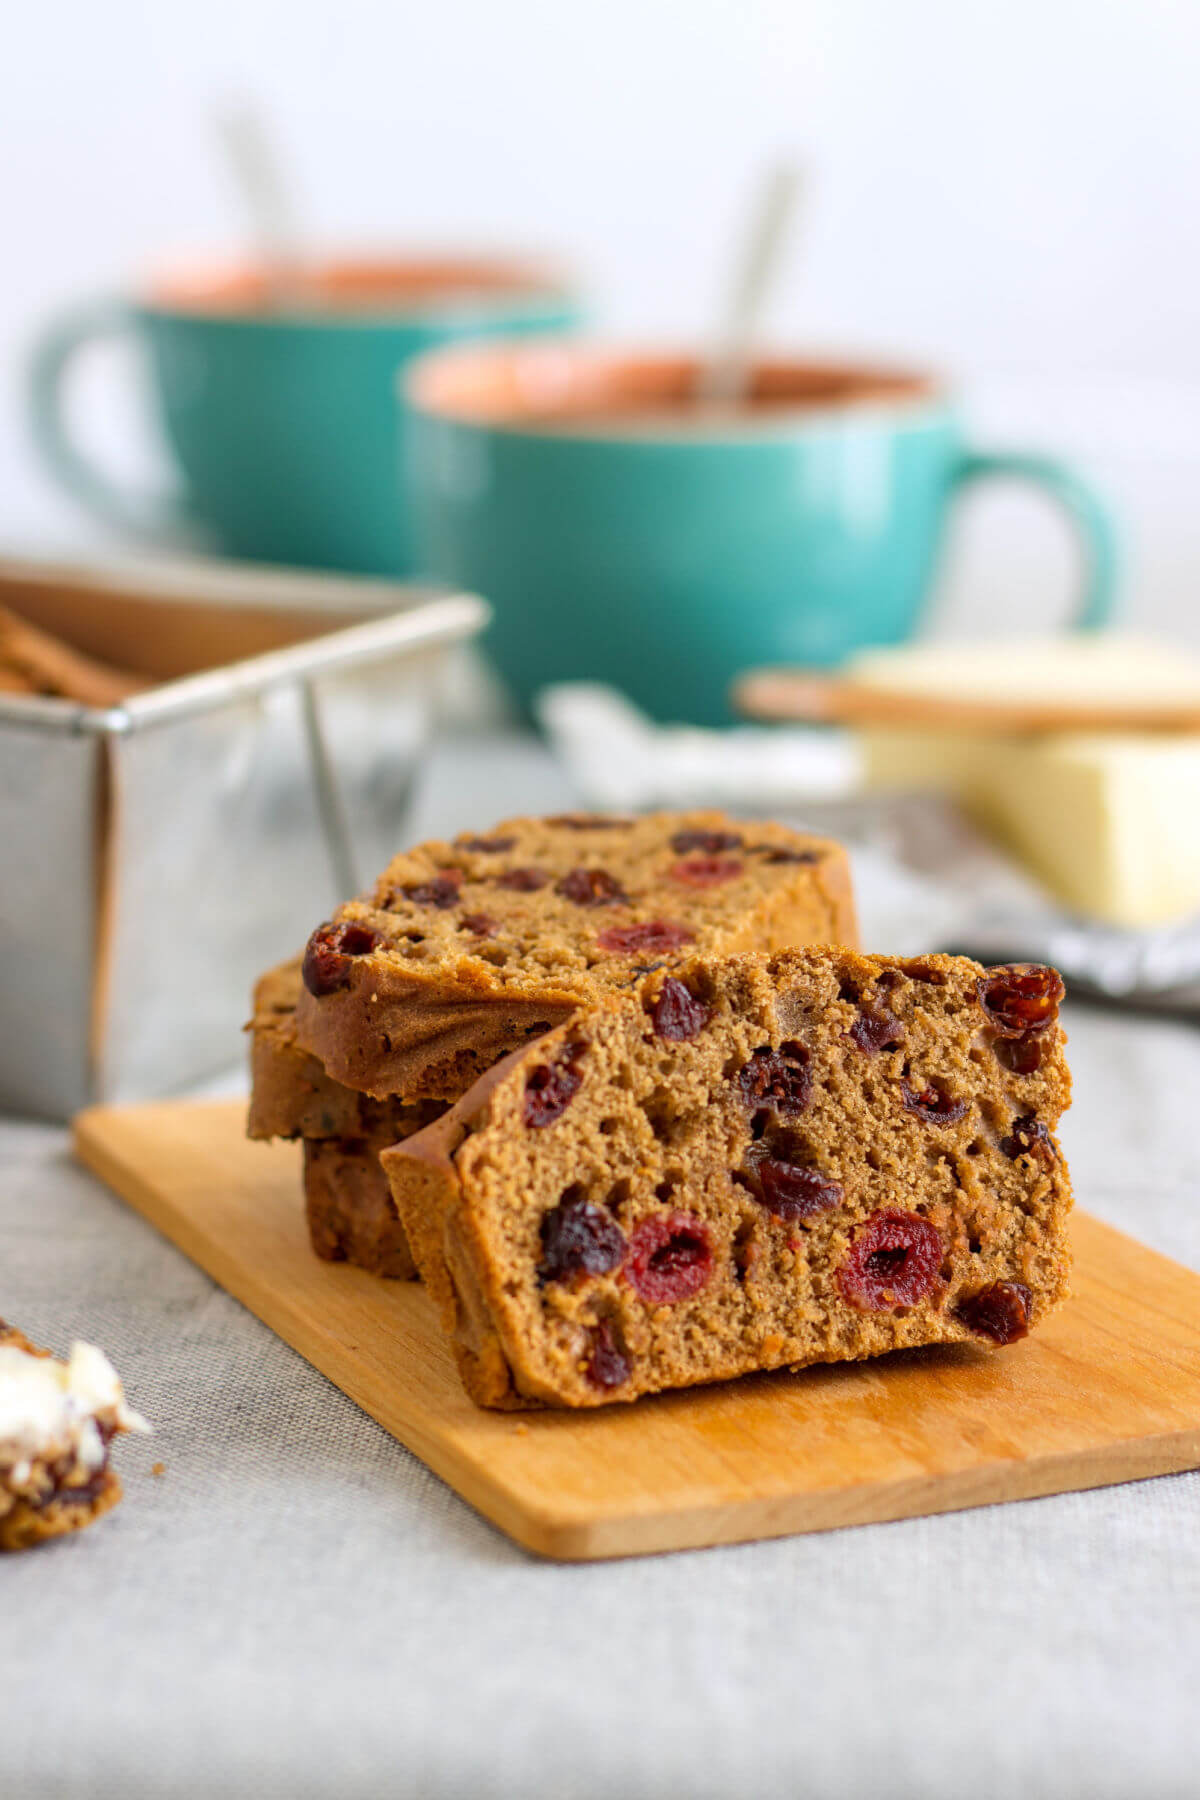 A loaf of homemade Irish barmbrack bread on a wooden cutting board with a loaf pan and coffee mugs in the background. This brown quickbread slice features cherries.